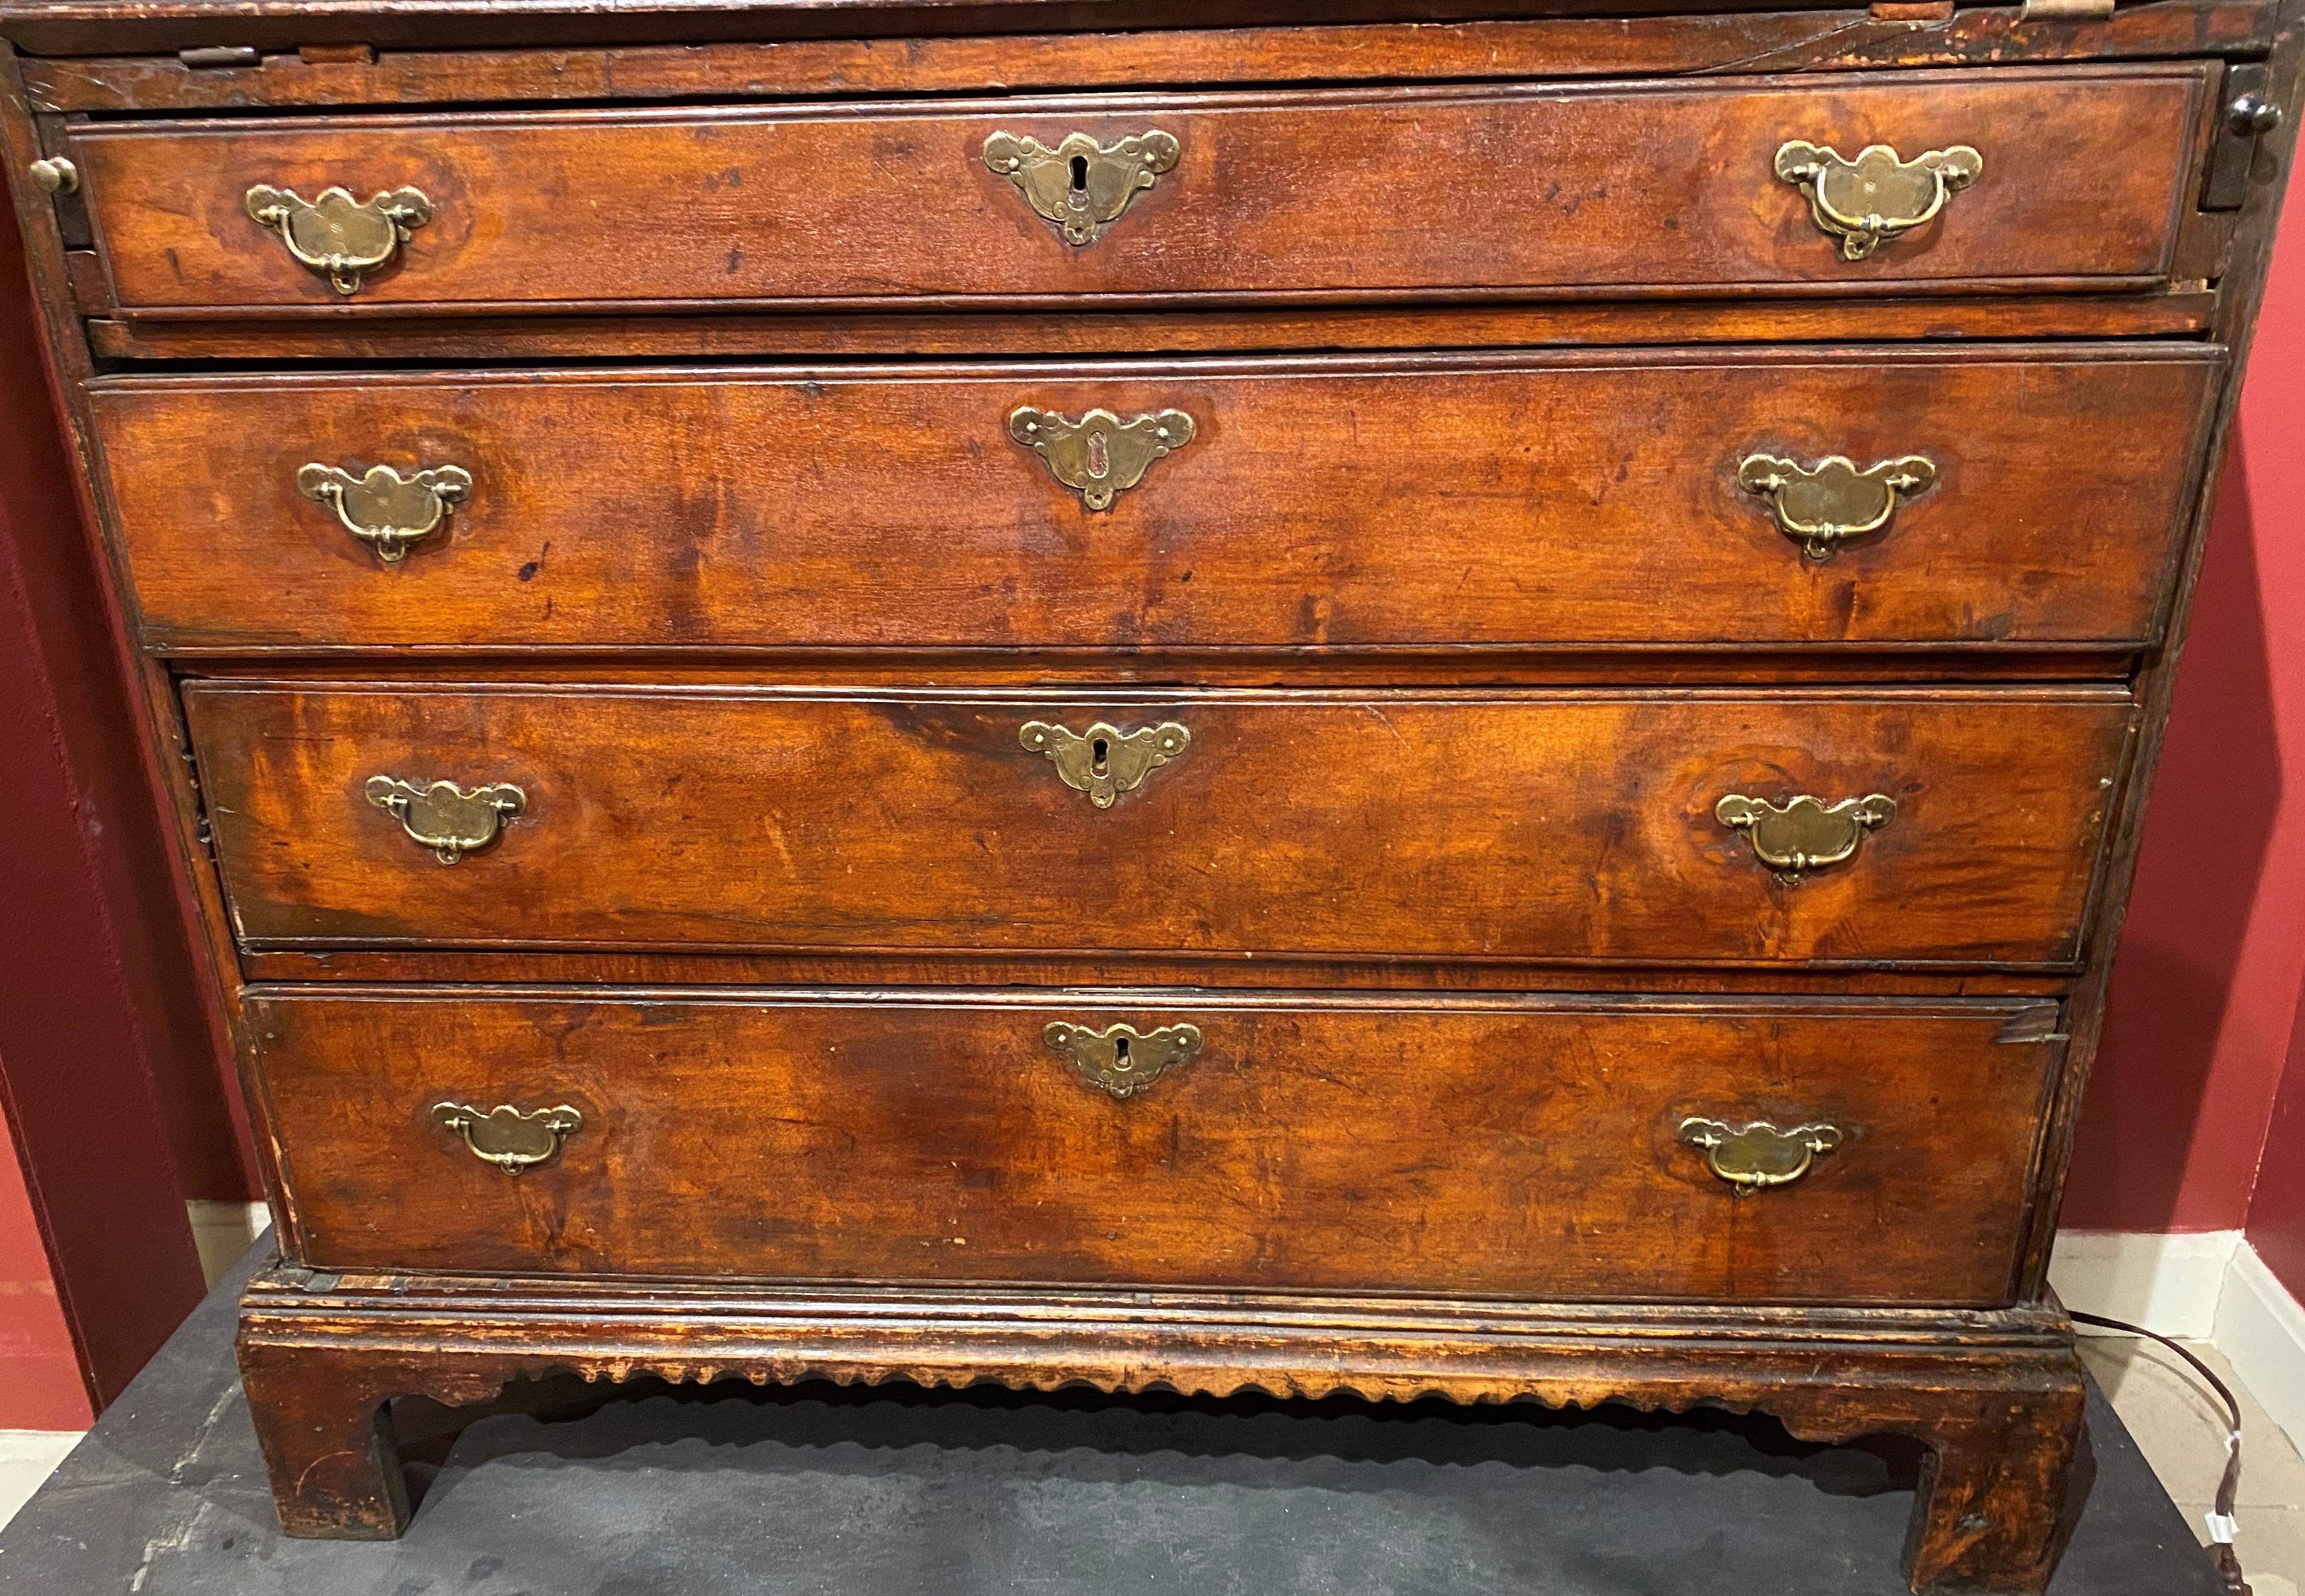 Hand-Carved Rare 18th Century NH Maple Fall Front Desk with Nicely Scalloped Apron